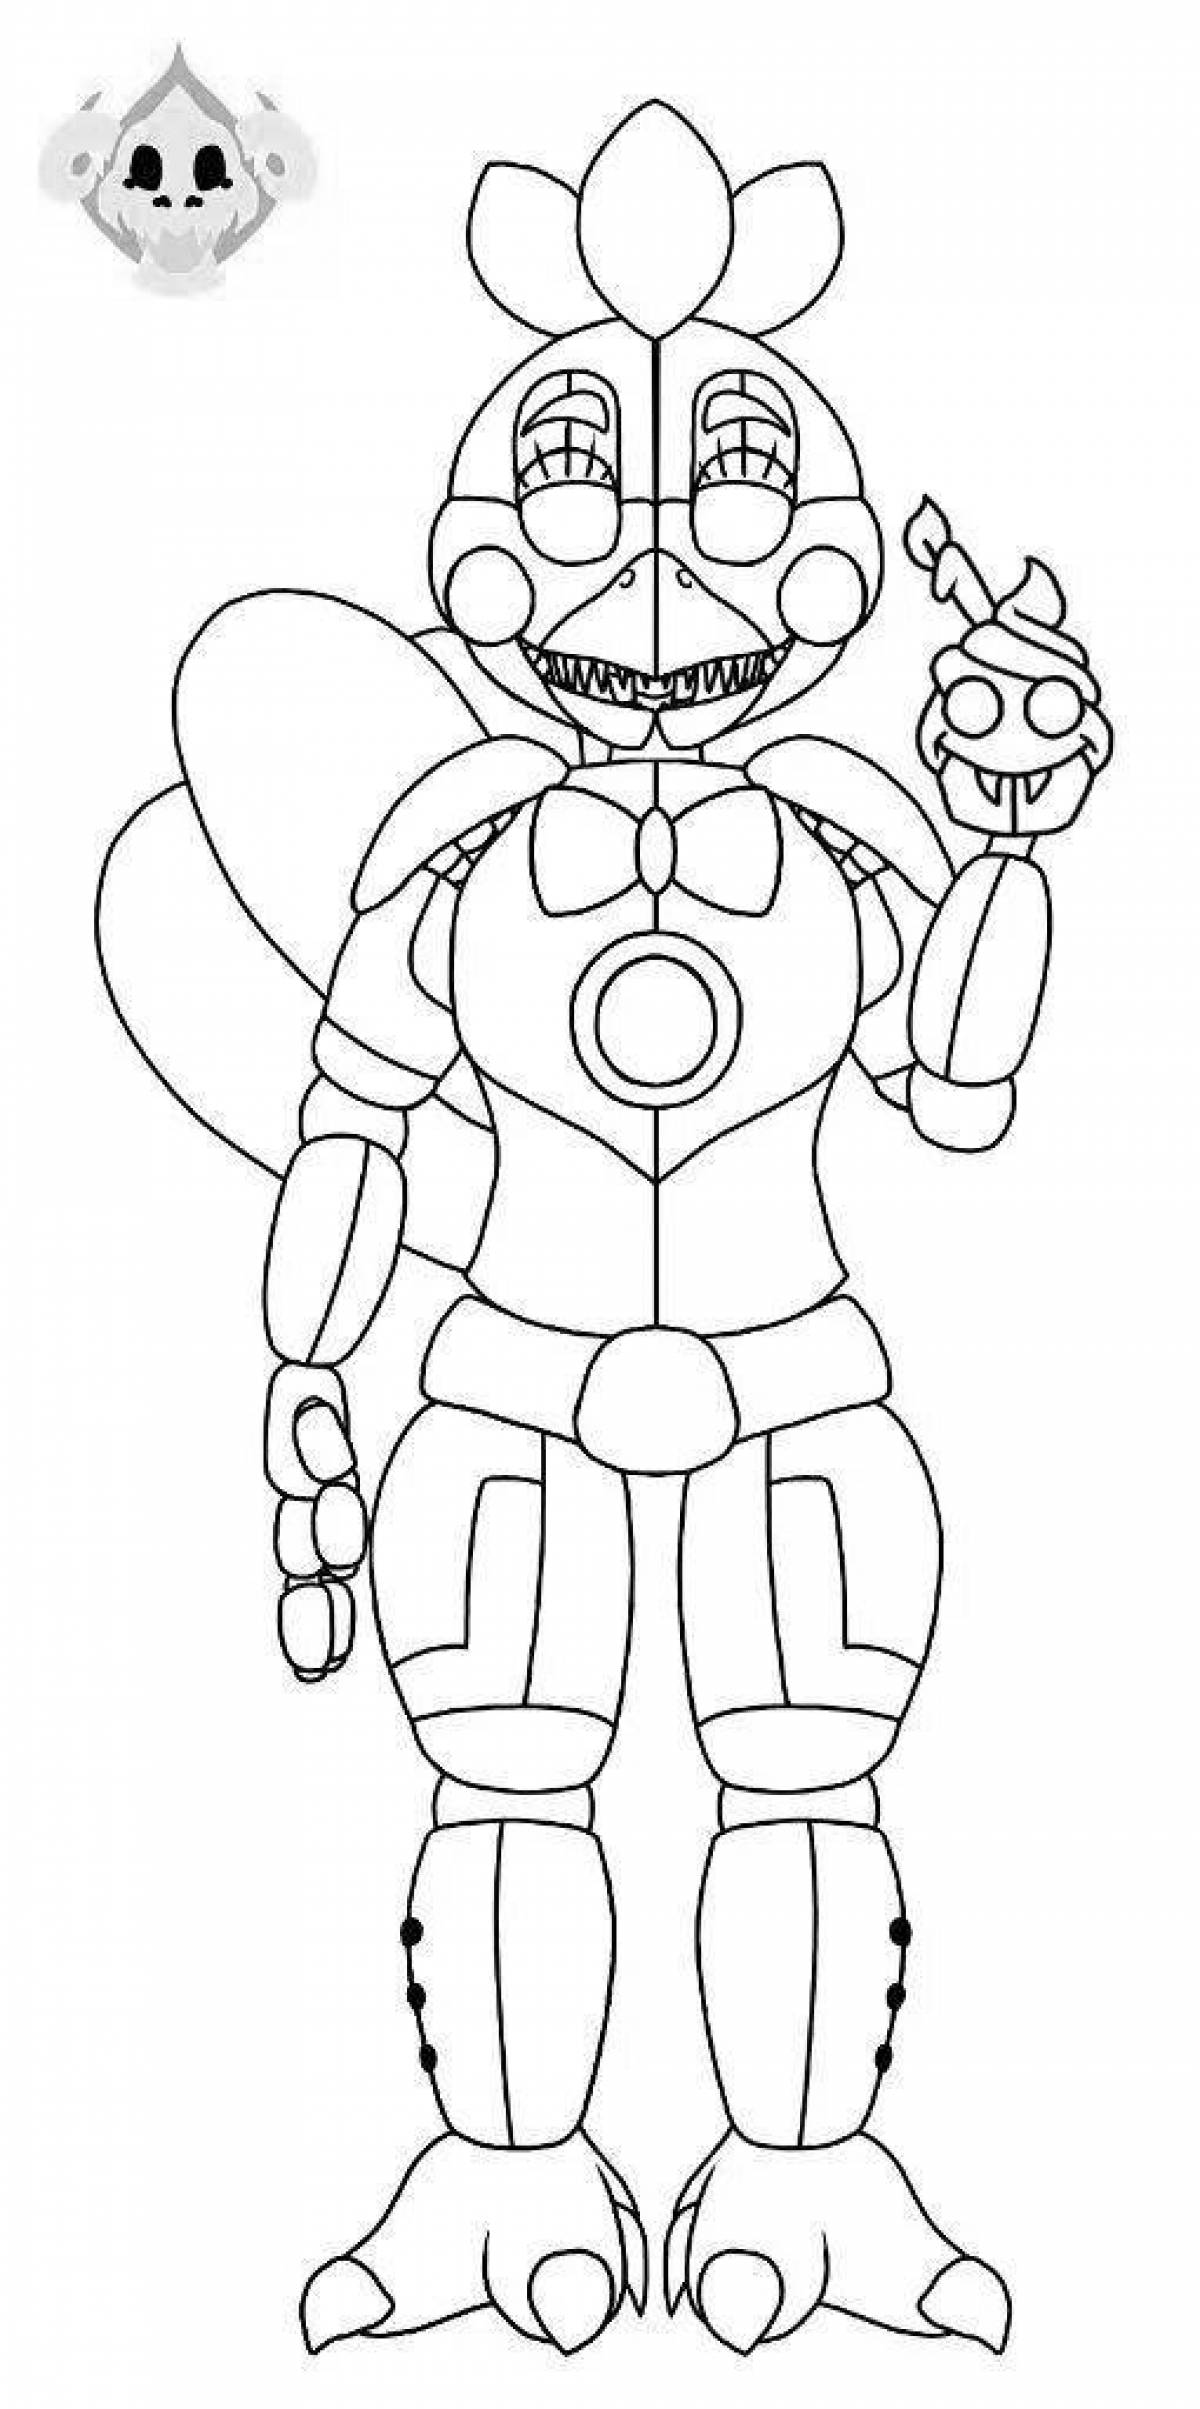 Toy chick's holiday coloring page